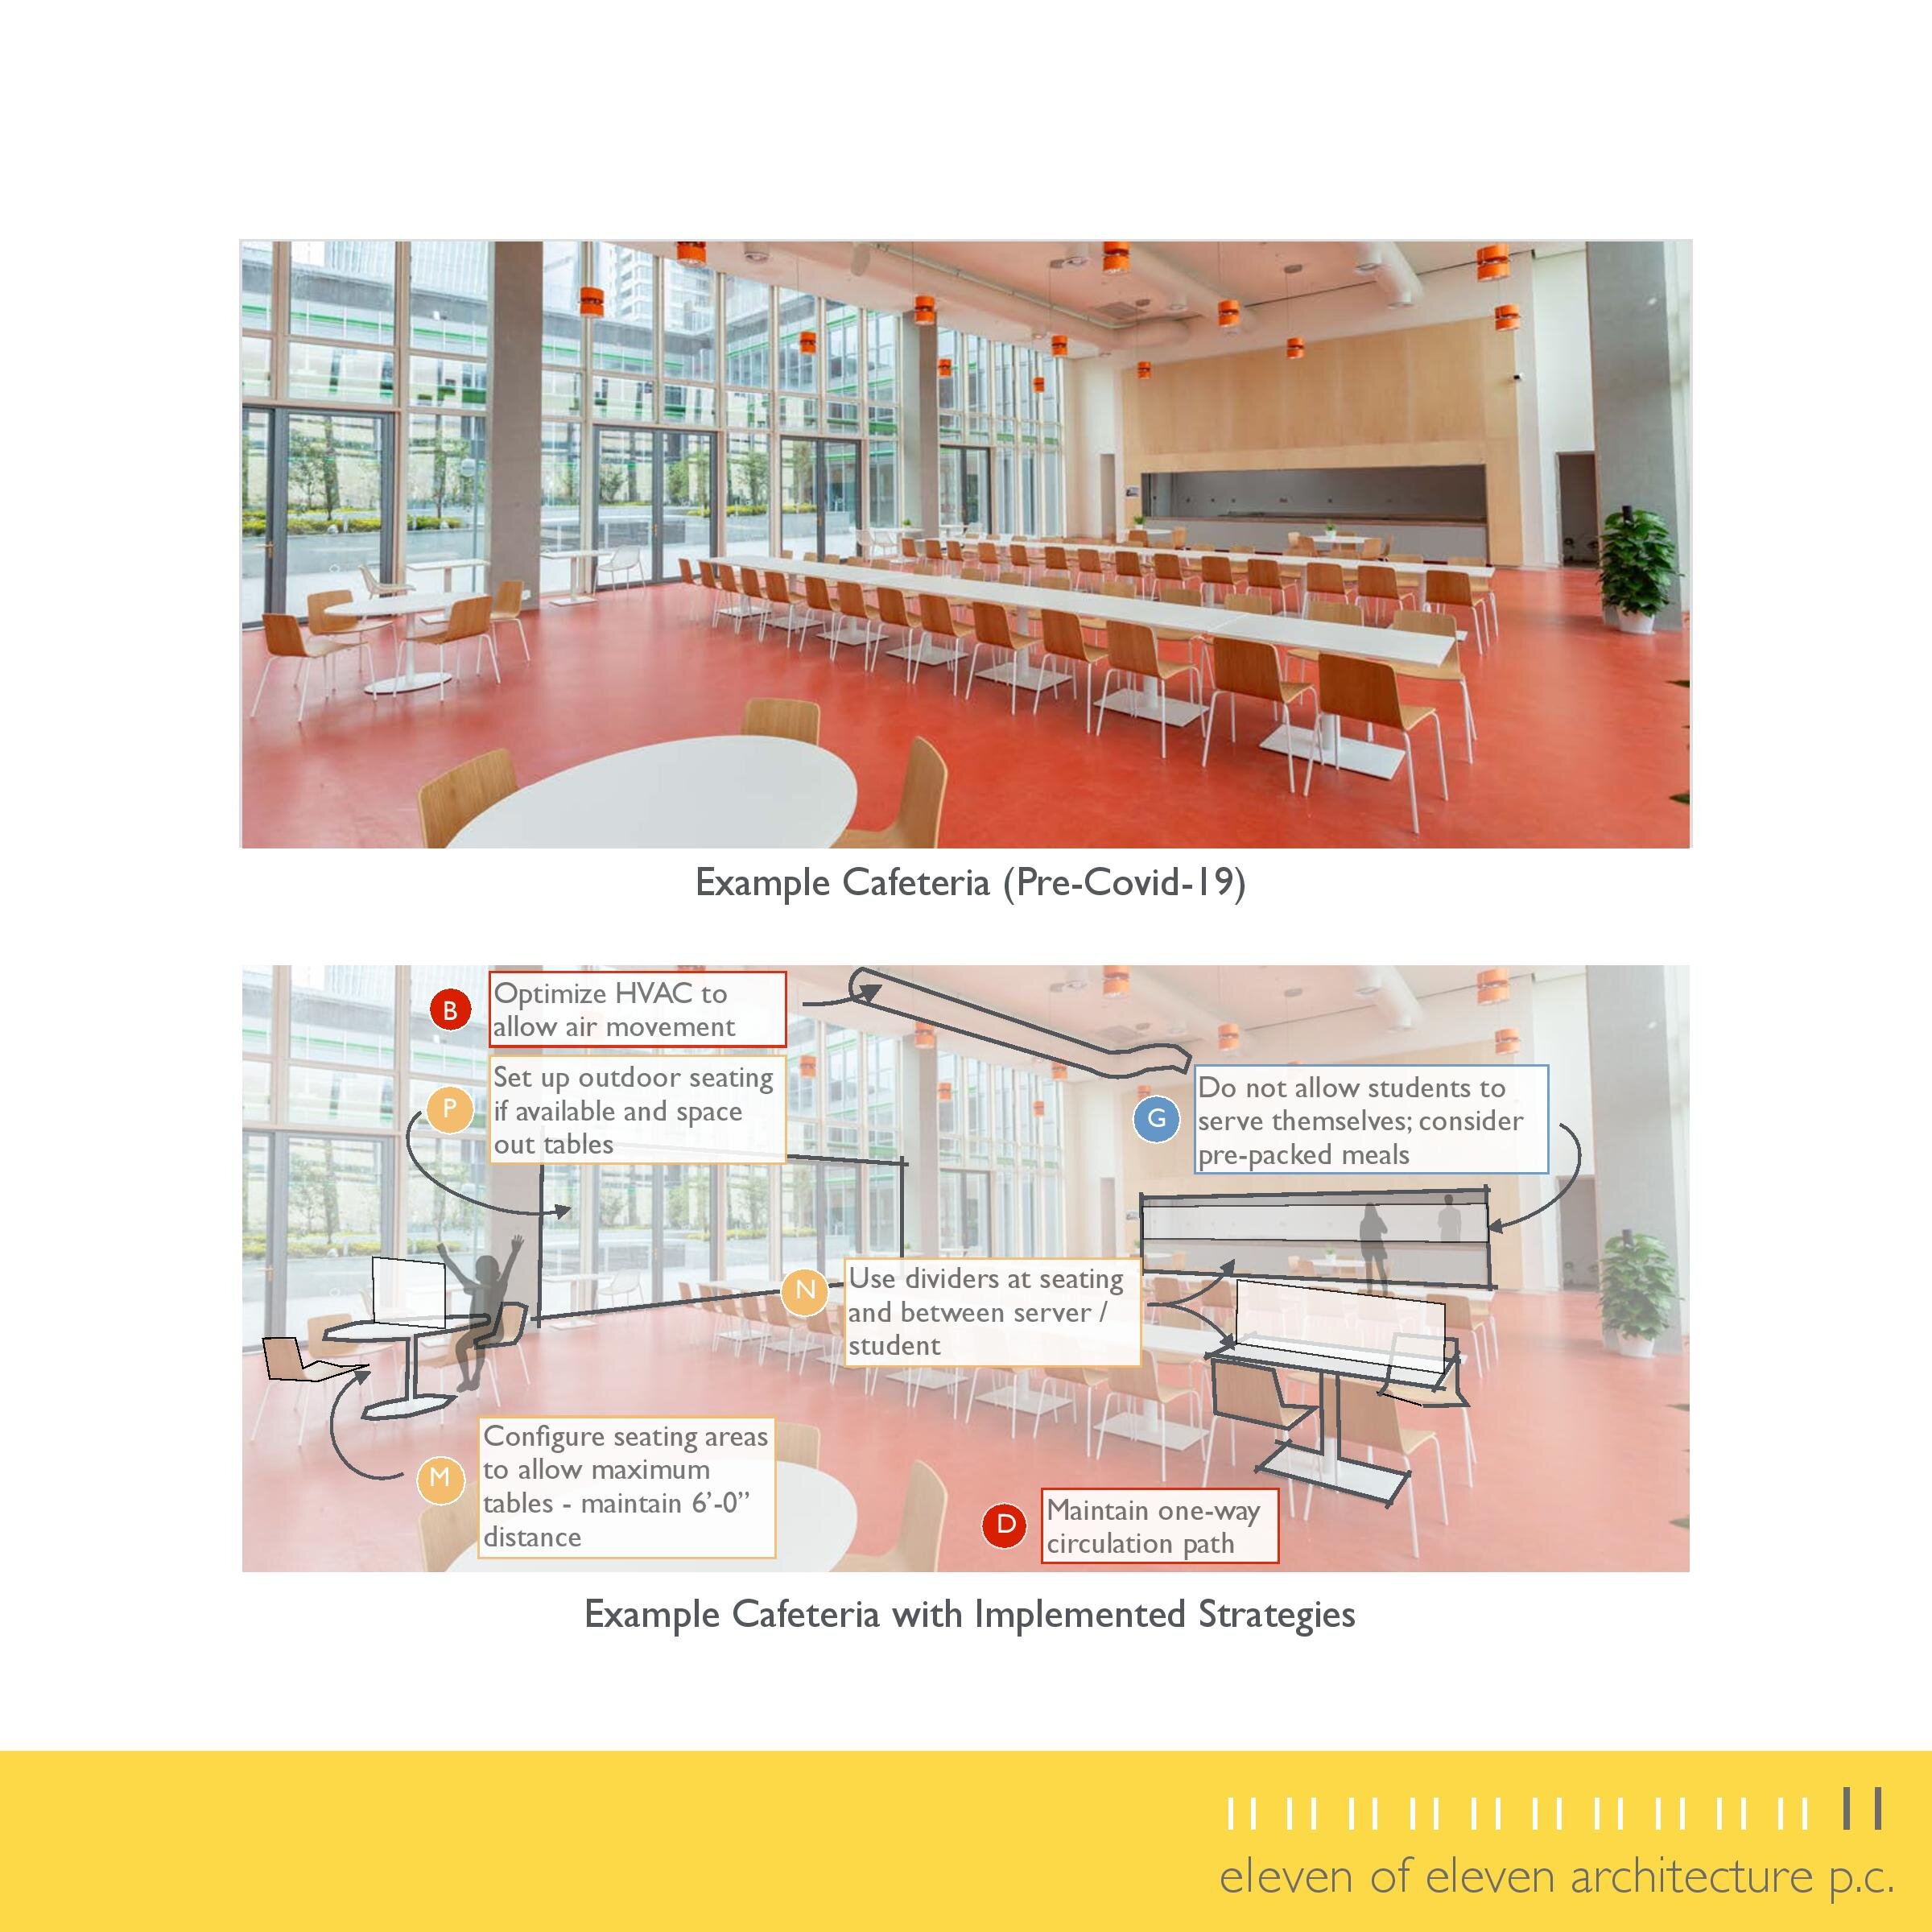 School Safety Strategies - Design Ideas for Impact of Covid-19-page-028.jpg